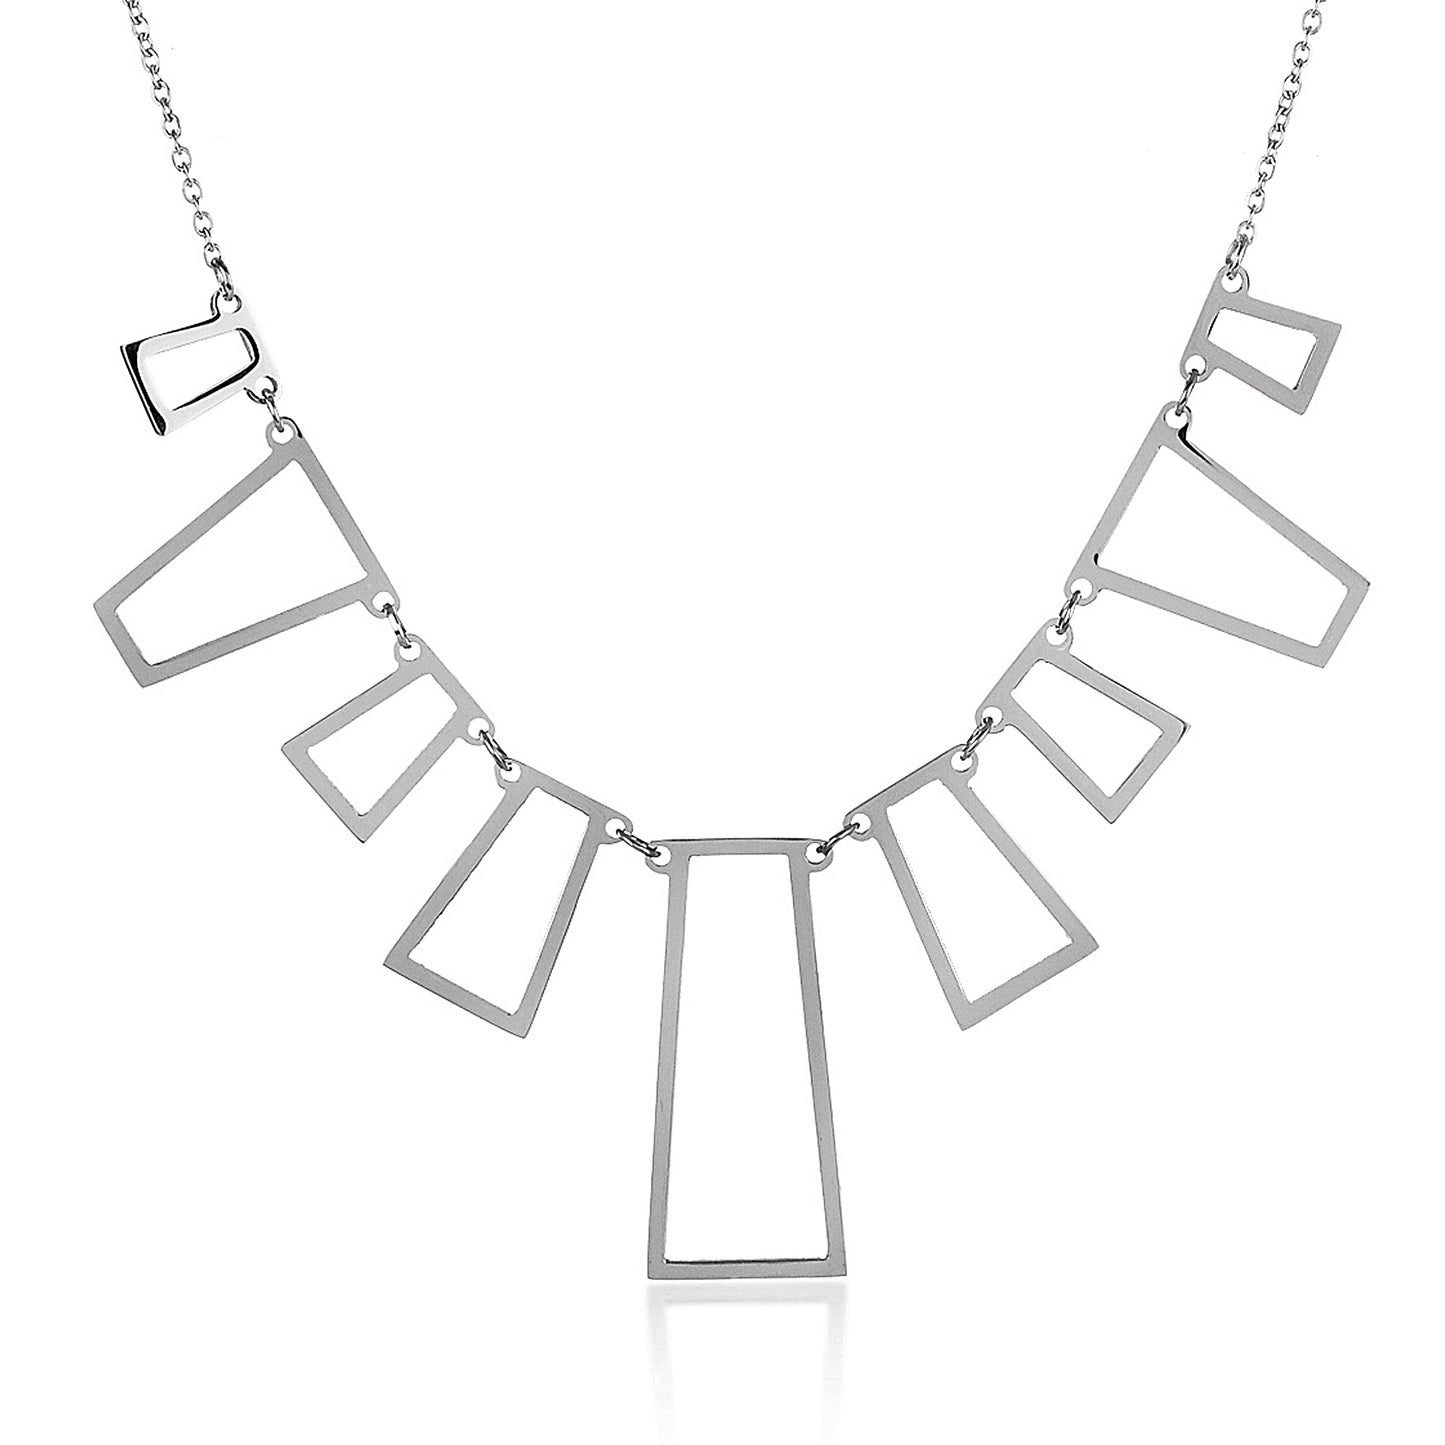 ELYA Women's High Polished Linked Open Geometric Stainless Steel Pendant Necklace